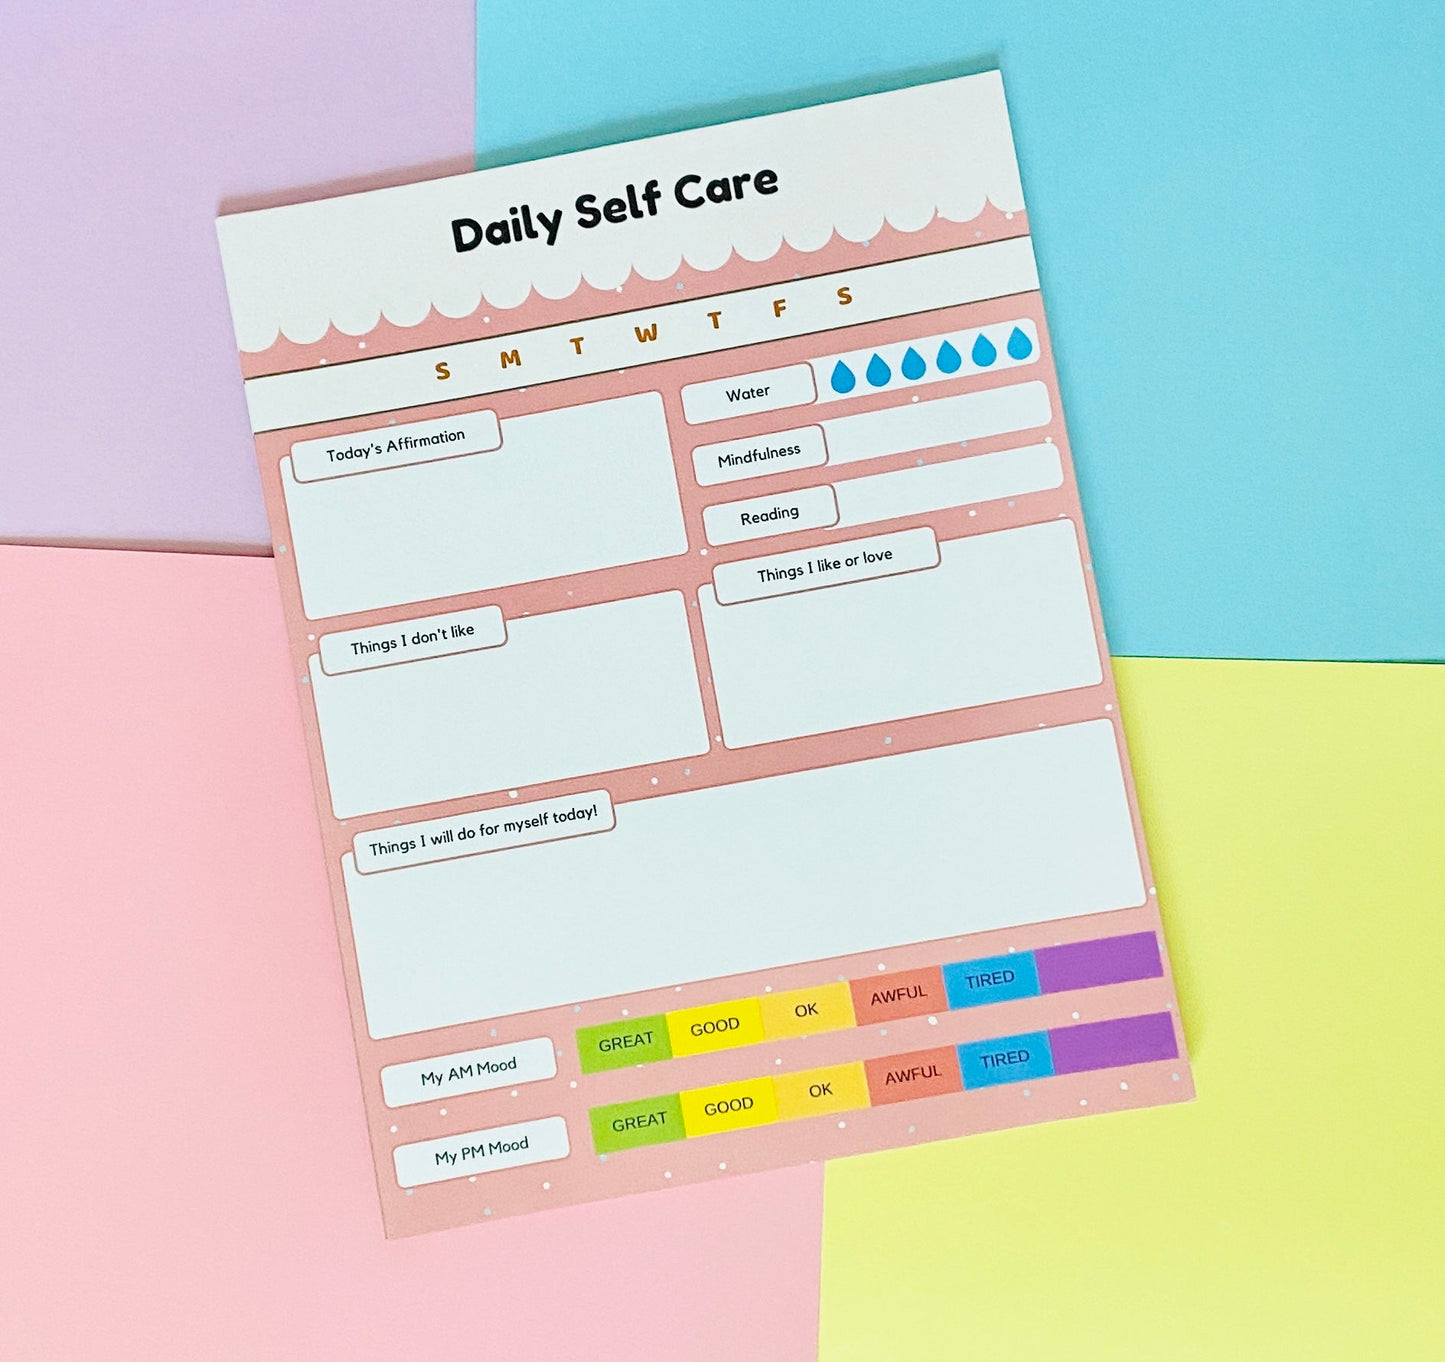 Self Care Pastel Jumbo Stationery Notepad Calendars, Organizers & Planners Pink Sweetheart